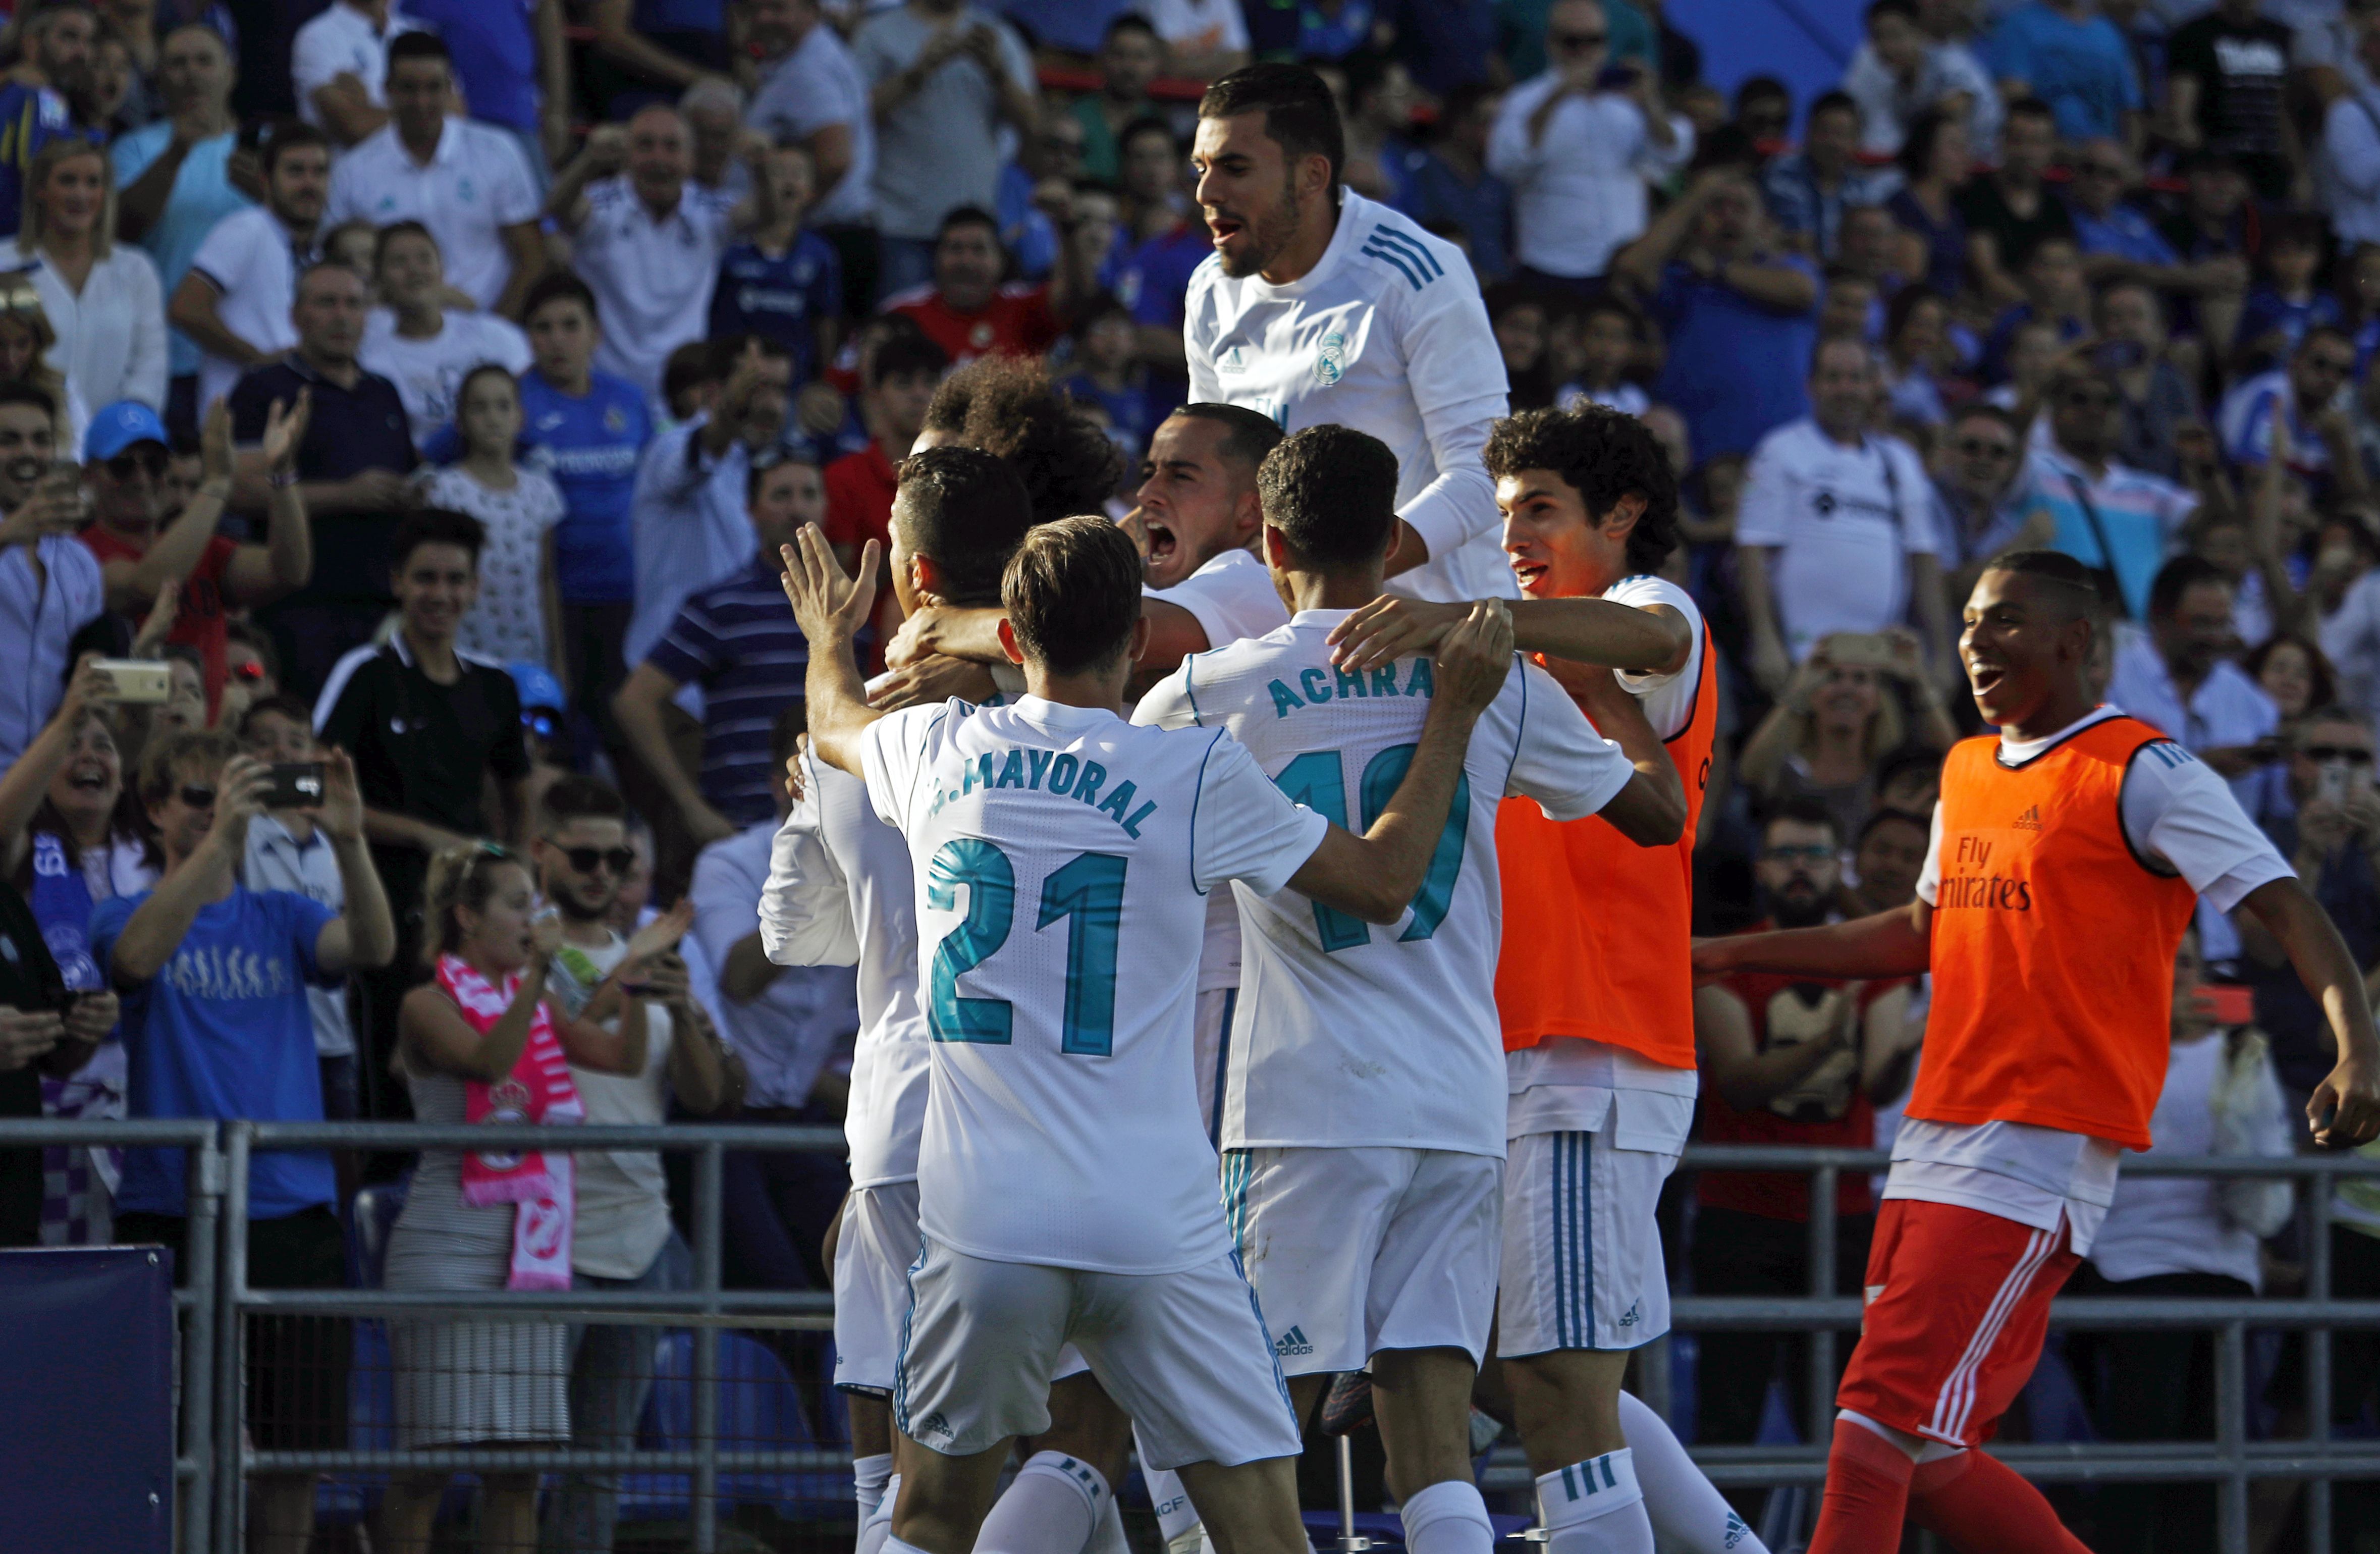 Real Madrid players celebrate their second goal during the Spanish league football match Getafe CF vs Real Madrid CF at the Col. Alfonso Perez stadium in Getafe on October 14, 2017. / AFP PHOTO / OSCAR DEL POZO        (Photo credit should read OSCAR DEL POZO/AFP/Getty Images)